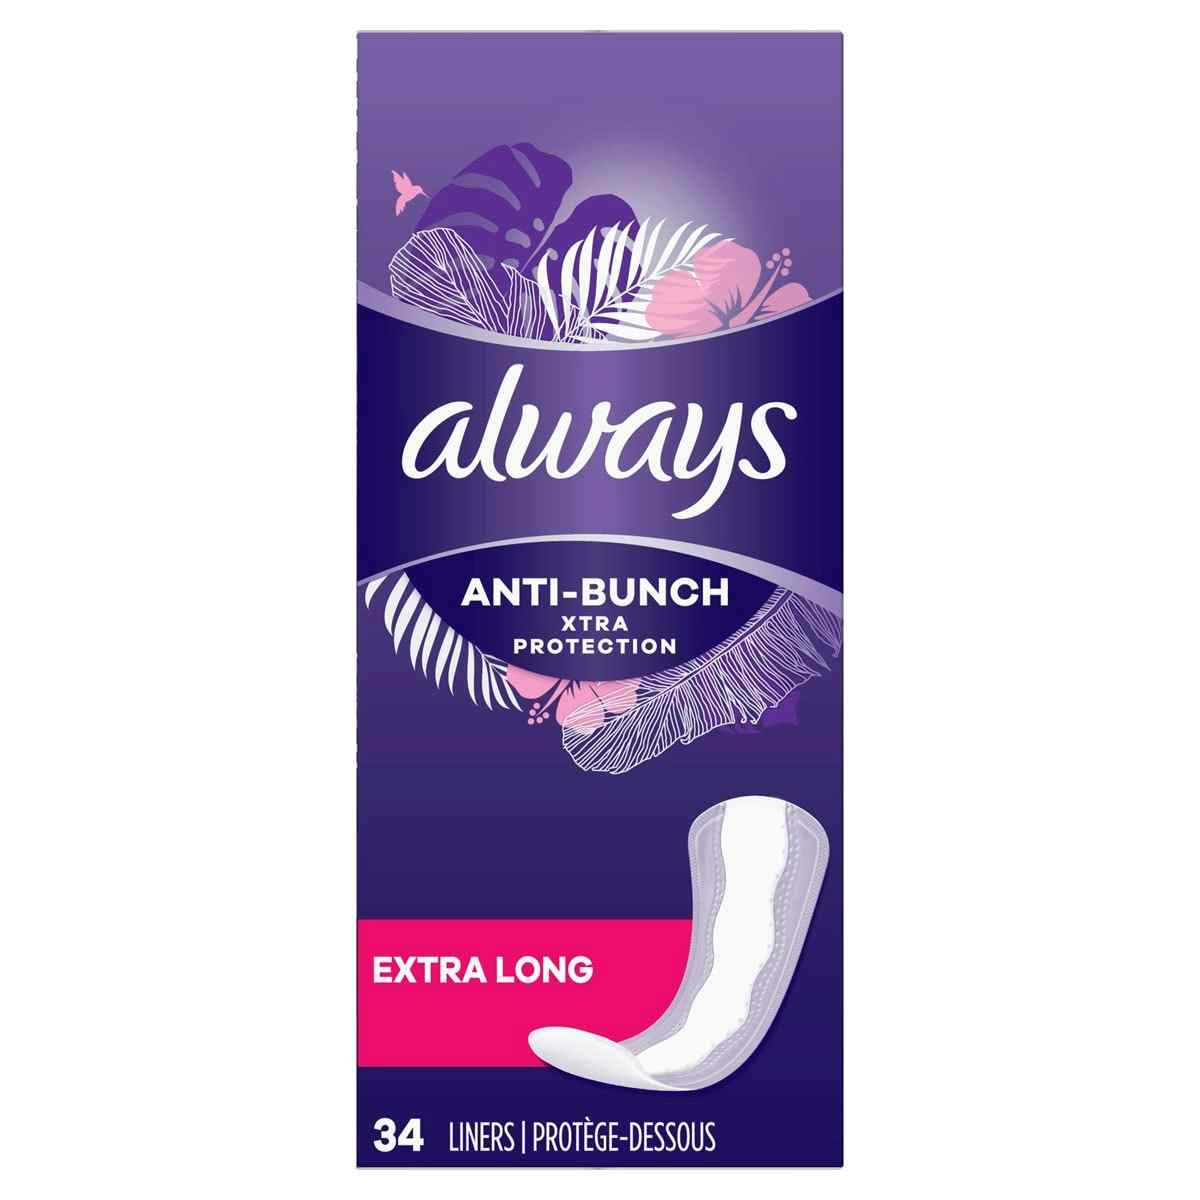 Always Anit-Bunch Xtra Protection Daily Liners, 80351704, Extra Long - Pack of 92